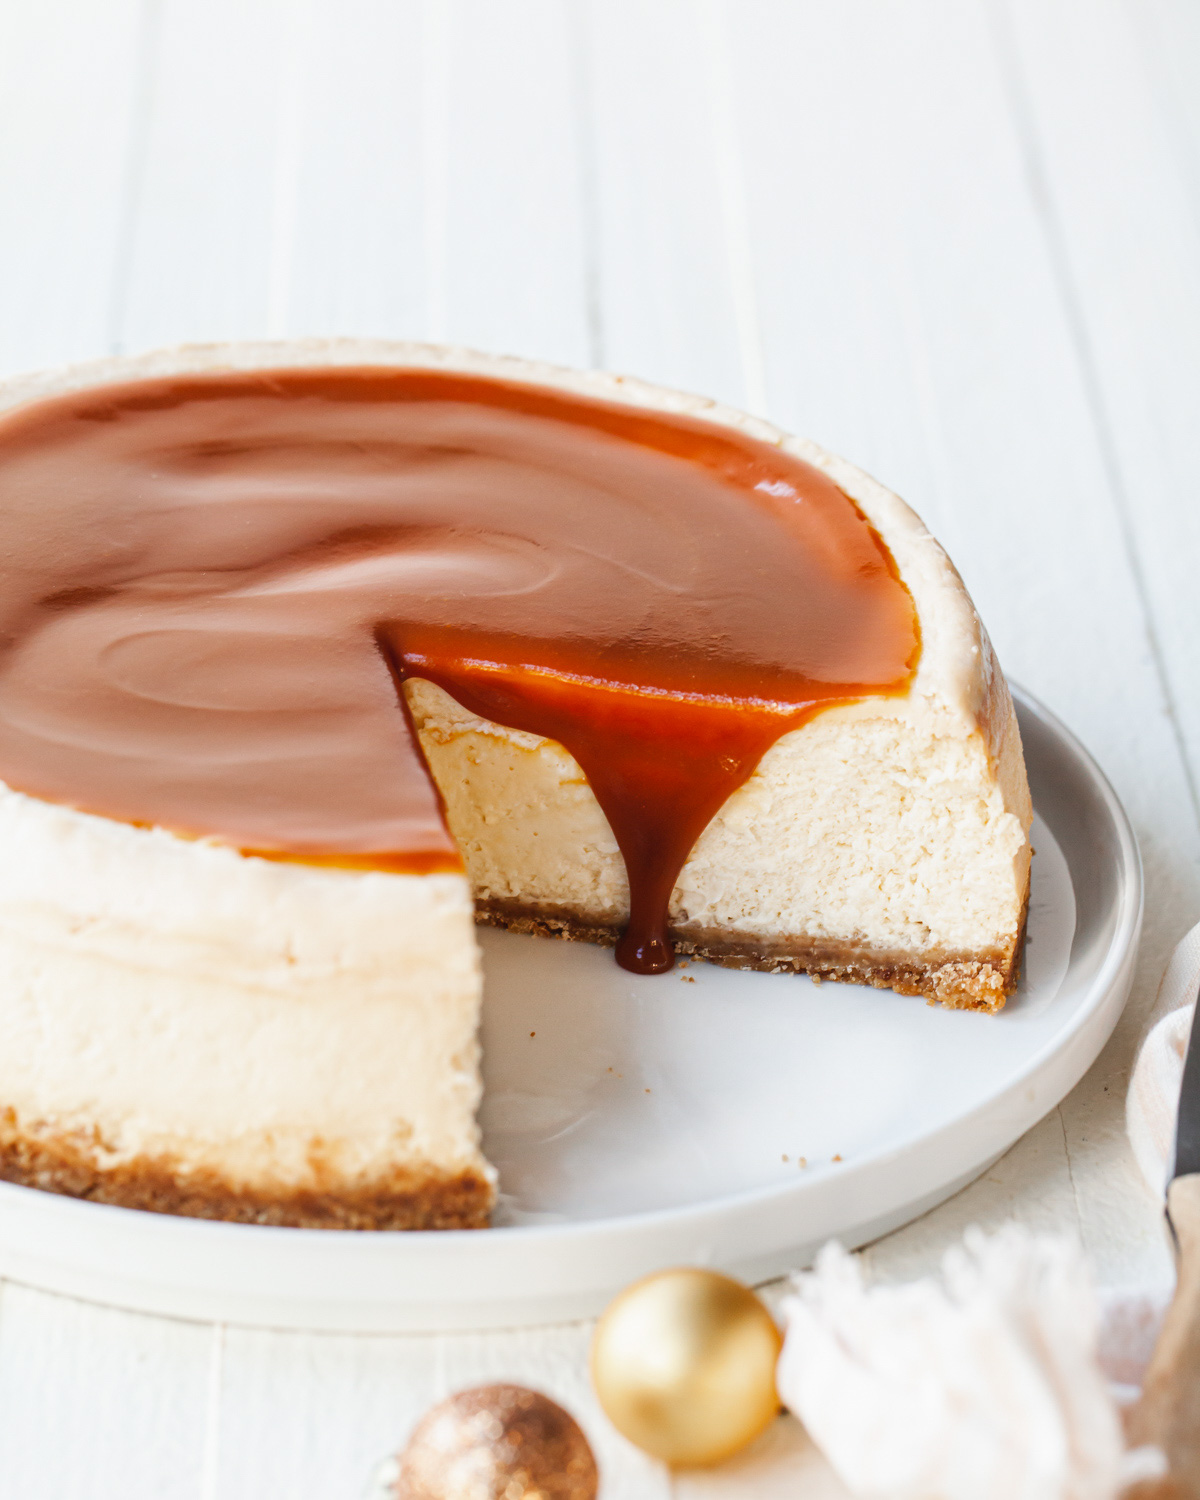 A slice cheesecake with caramel sauce dripping down